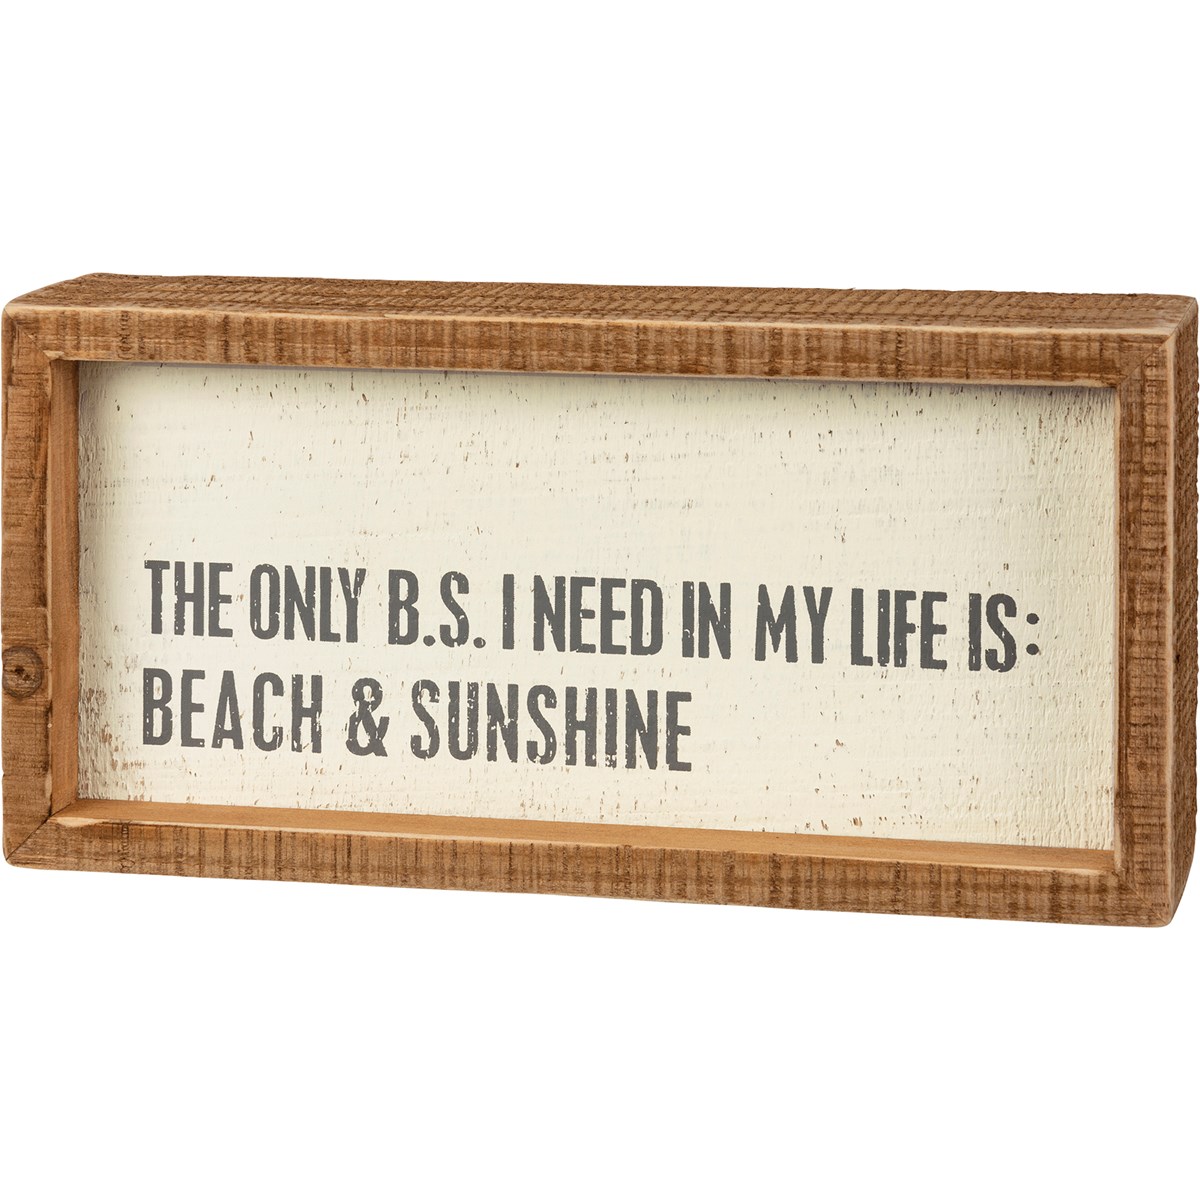 I Need In My Life Inset Box Sign - Wood